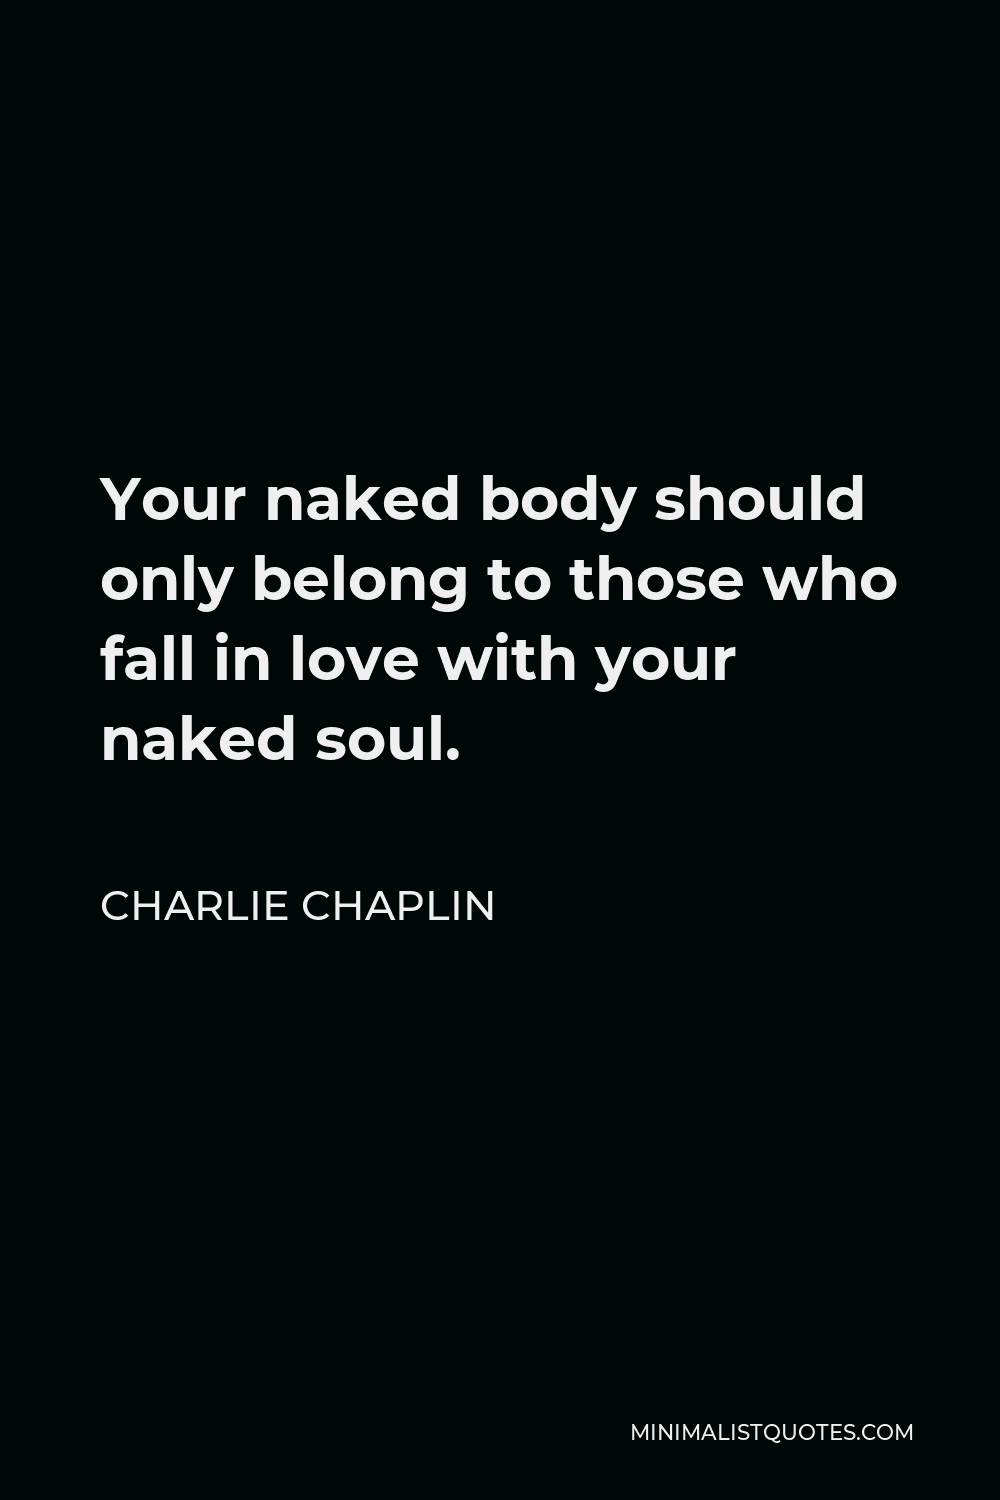 Naked Quotes Minimalist Quotes